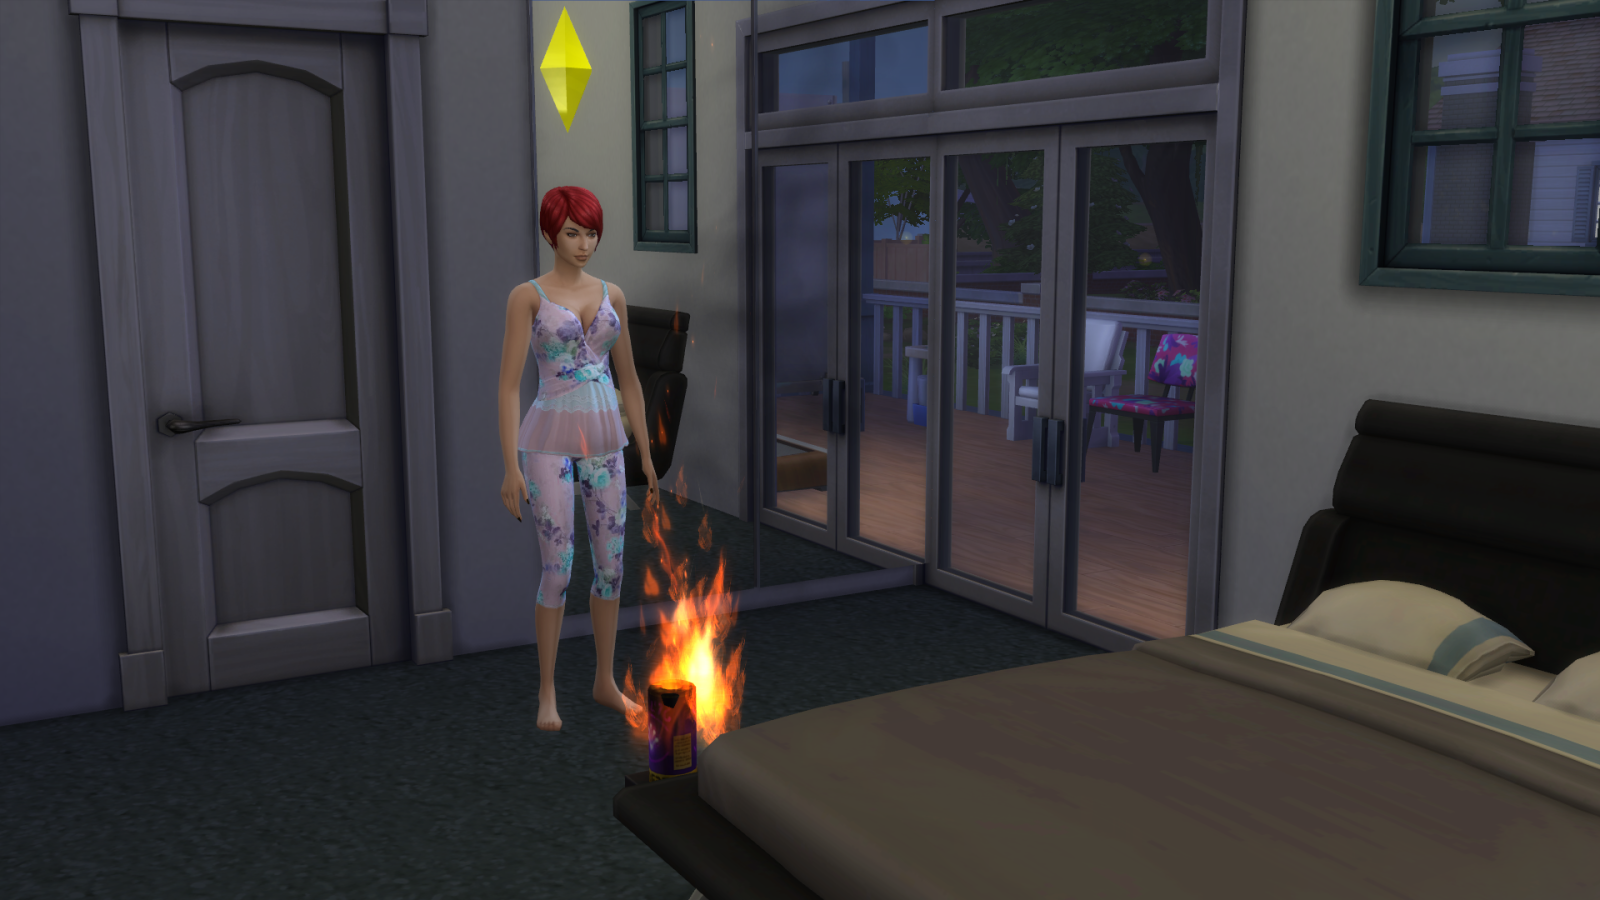 https://forums.thesims.com/EN_US/discussion/920168/never-tell-a-sim-with-fireworks-in-their-inventory